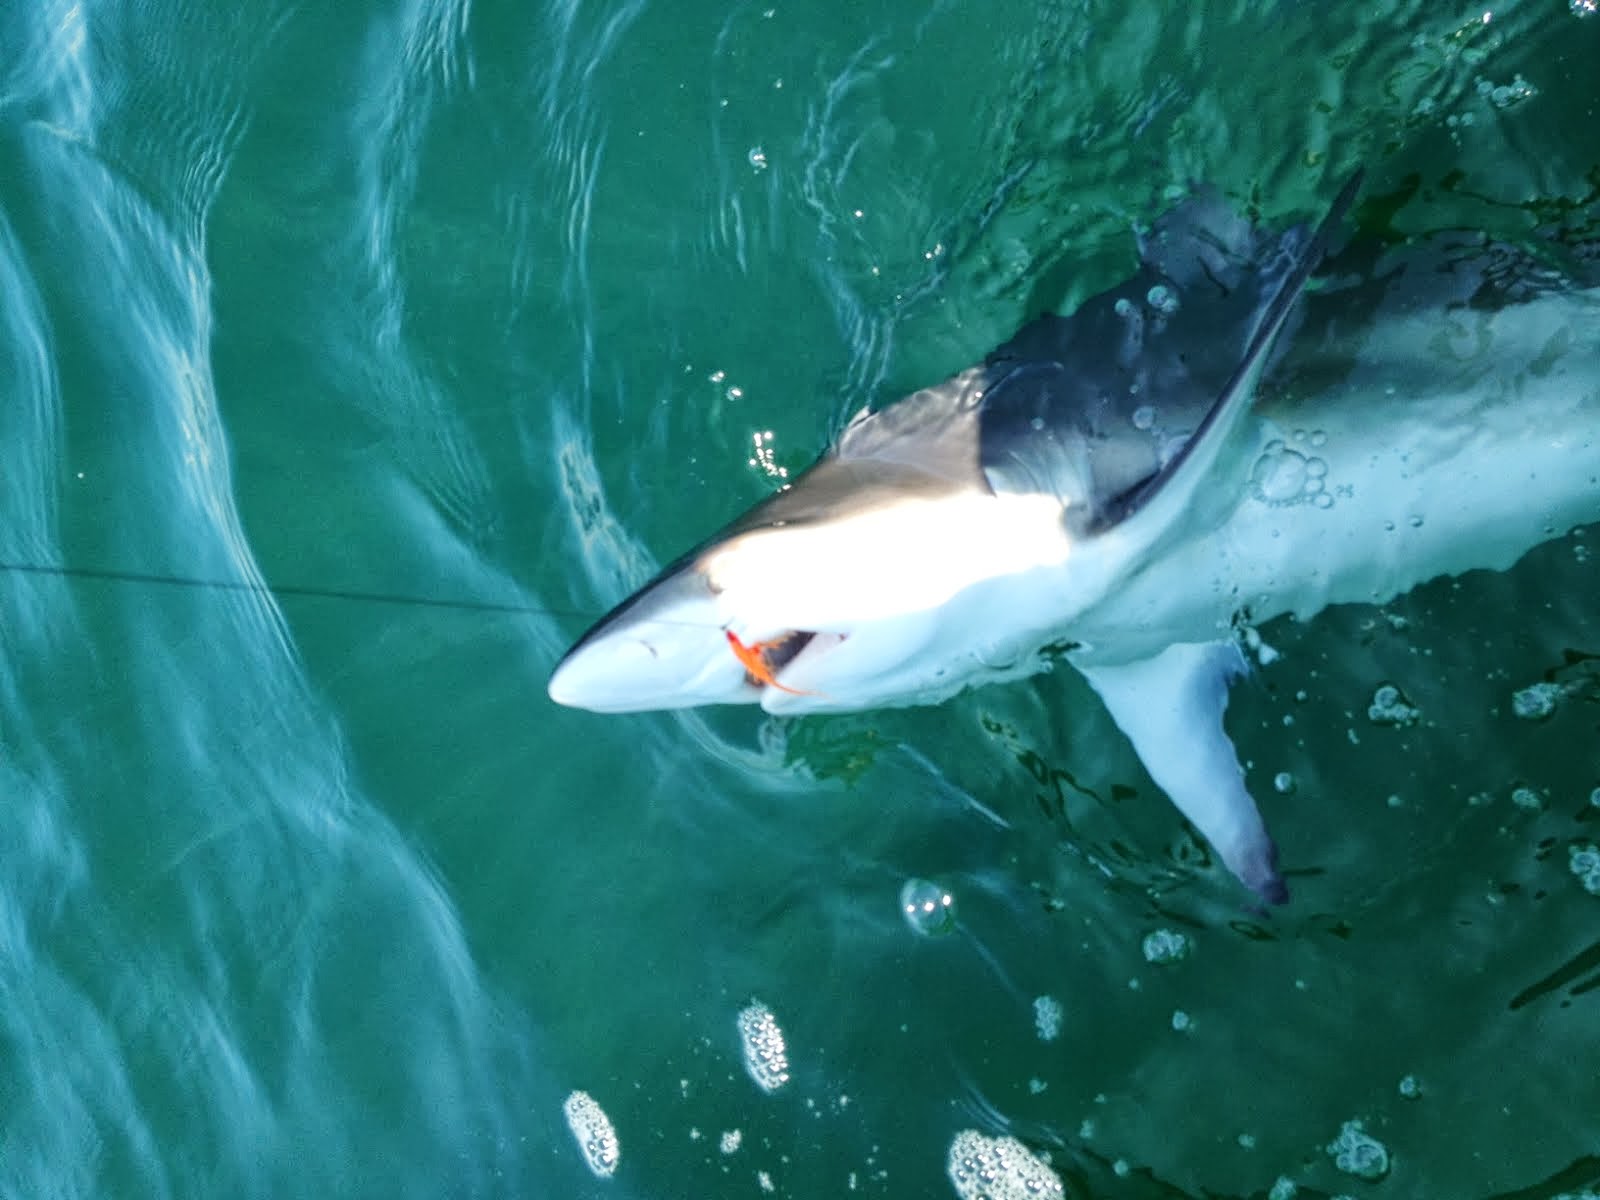 Jersey Cape Guide Service: Sharks on the Fly